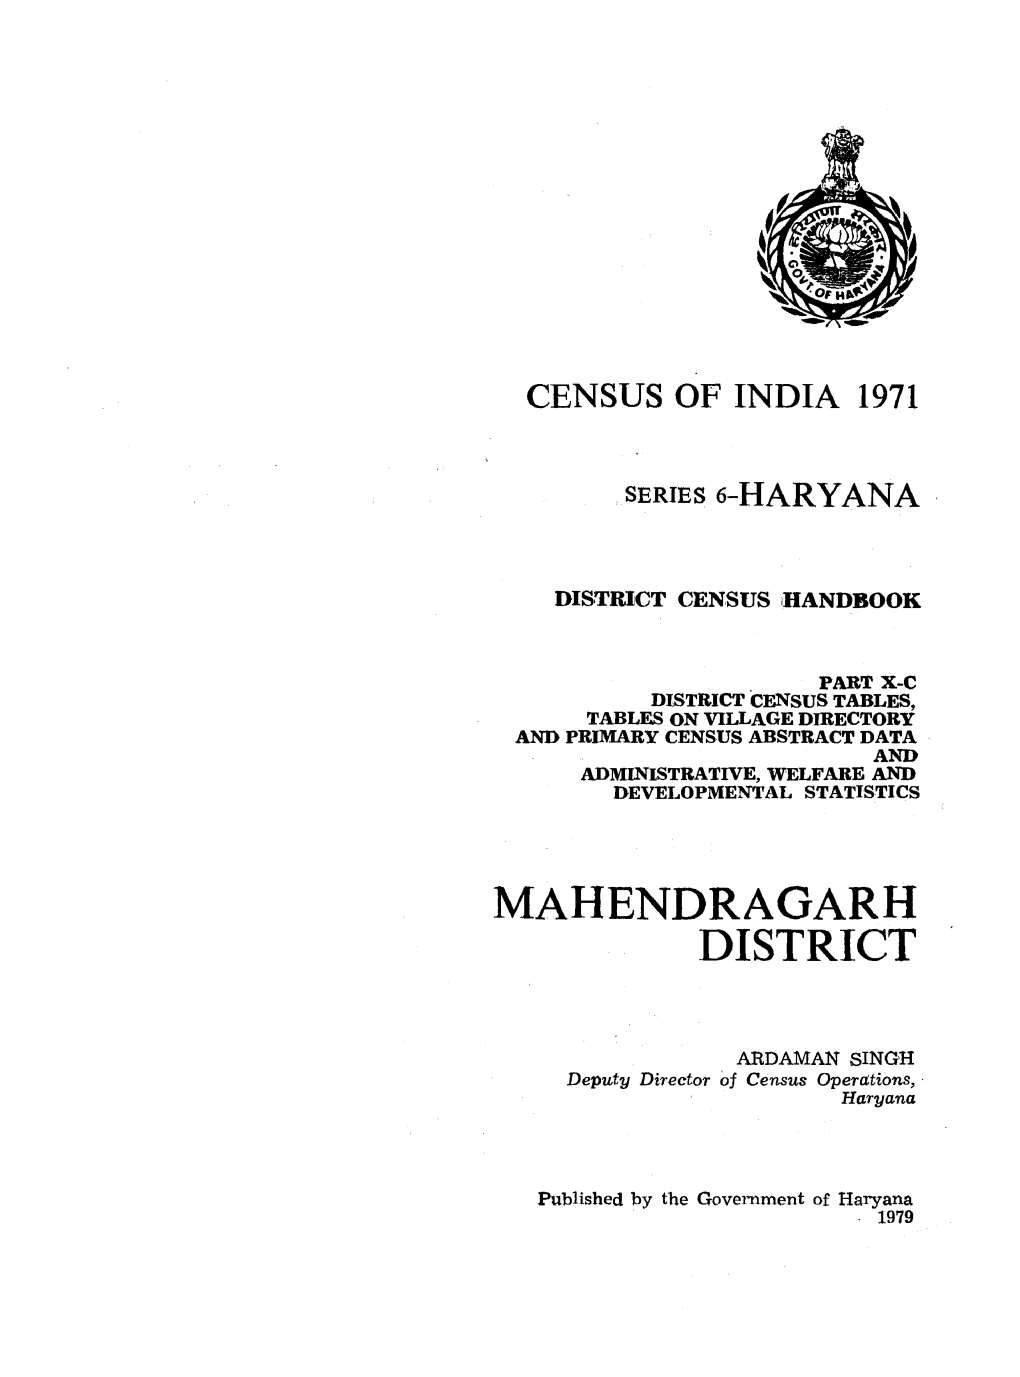 District Census Tables, Tables on Village Directory and Primary Census Abstract Data and Administrative, Welfare and Developmental Statistics